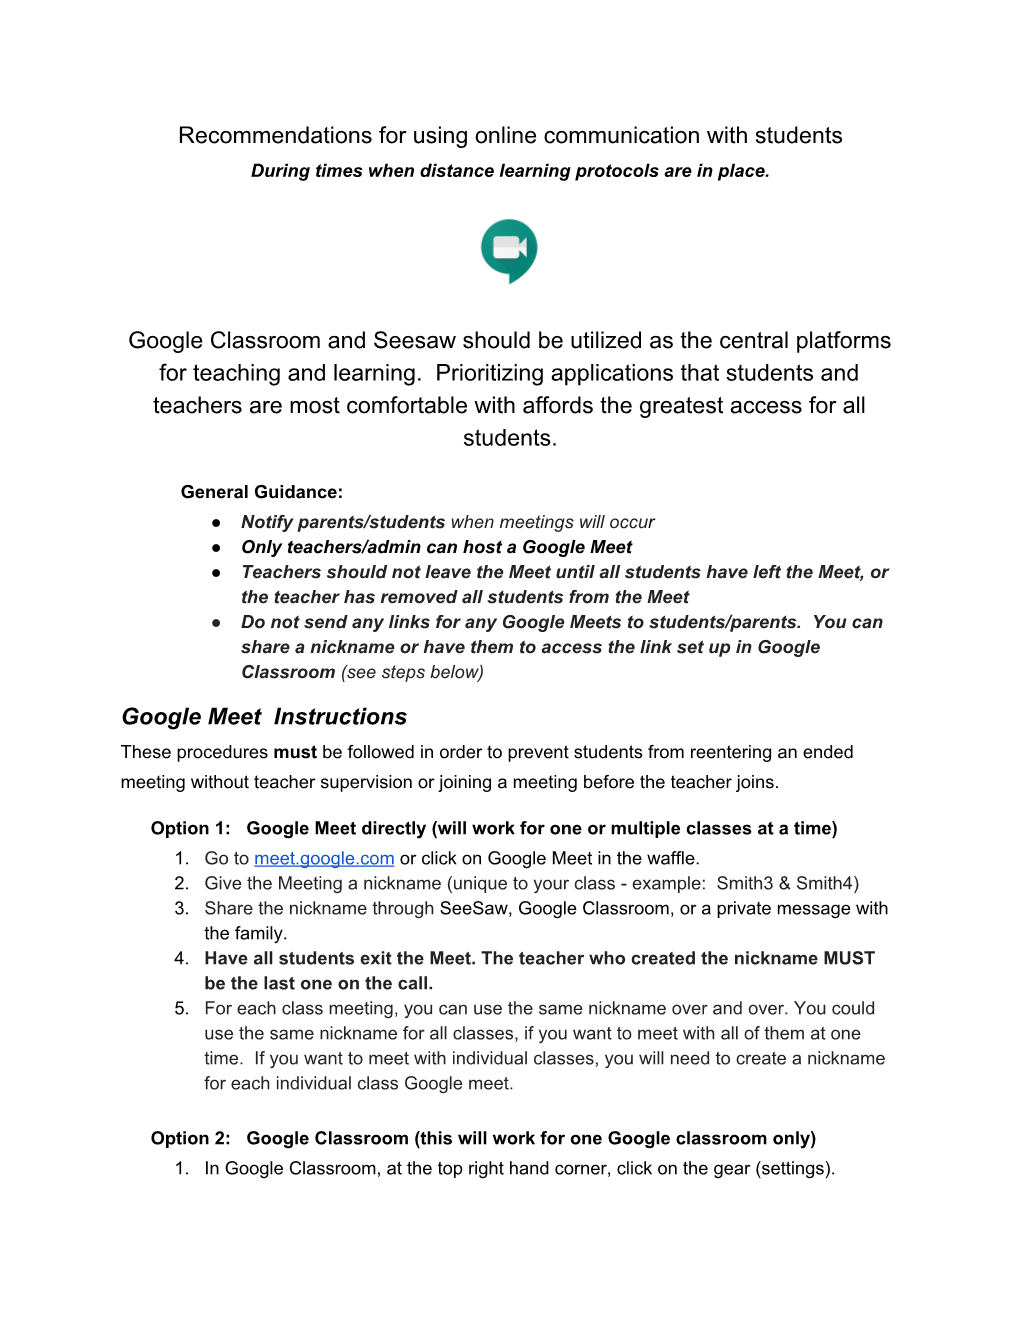 NGES Recommendations for Using Google Meet